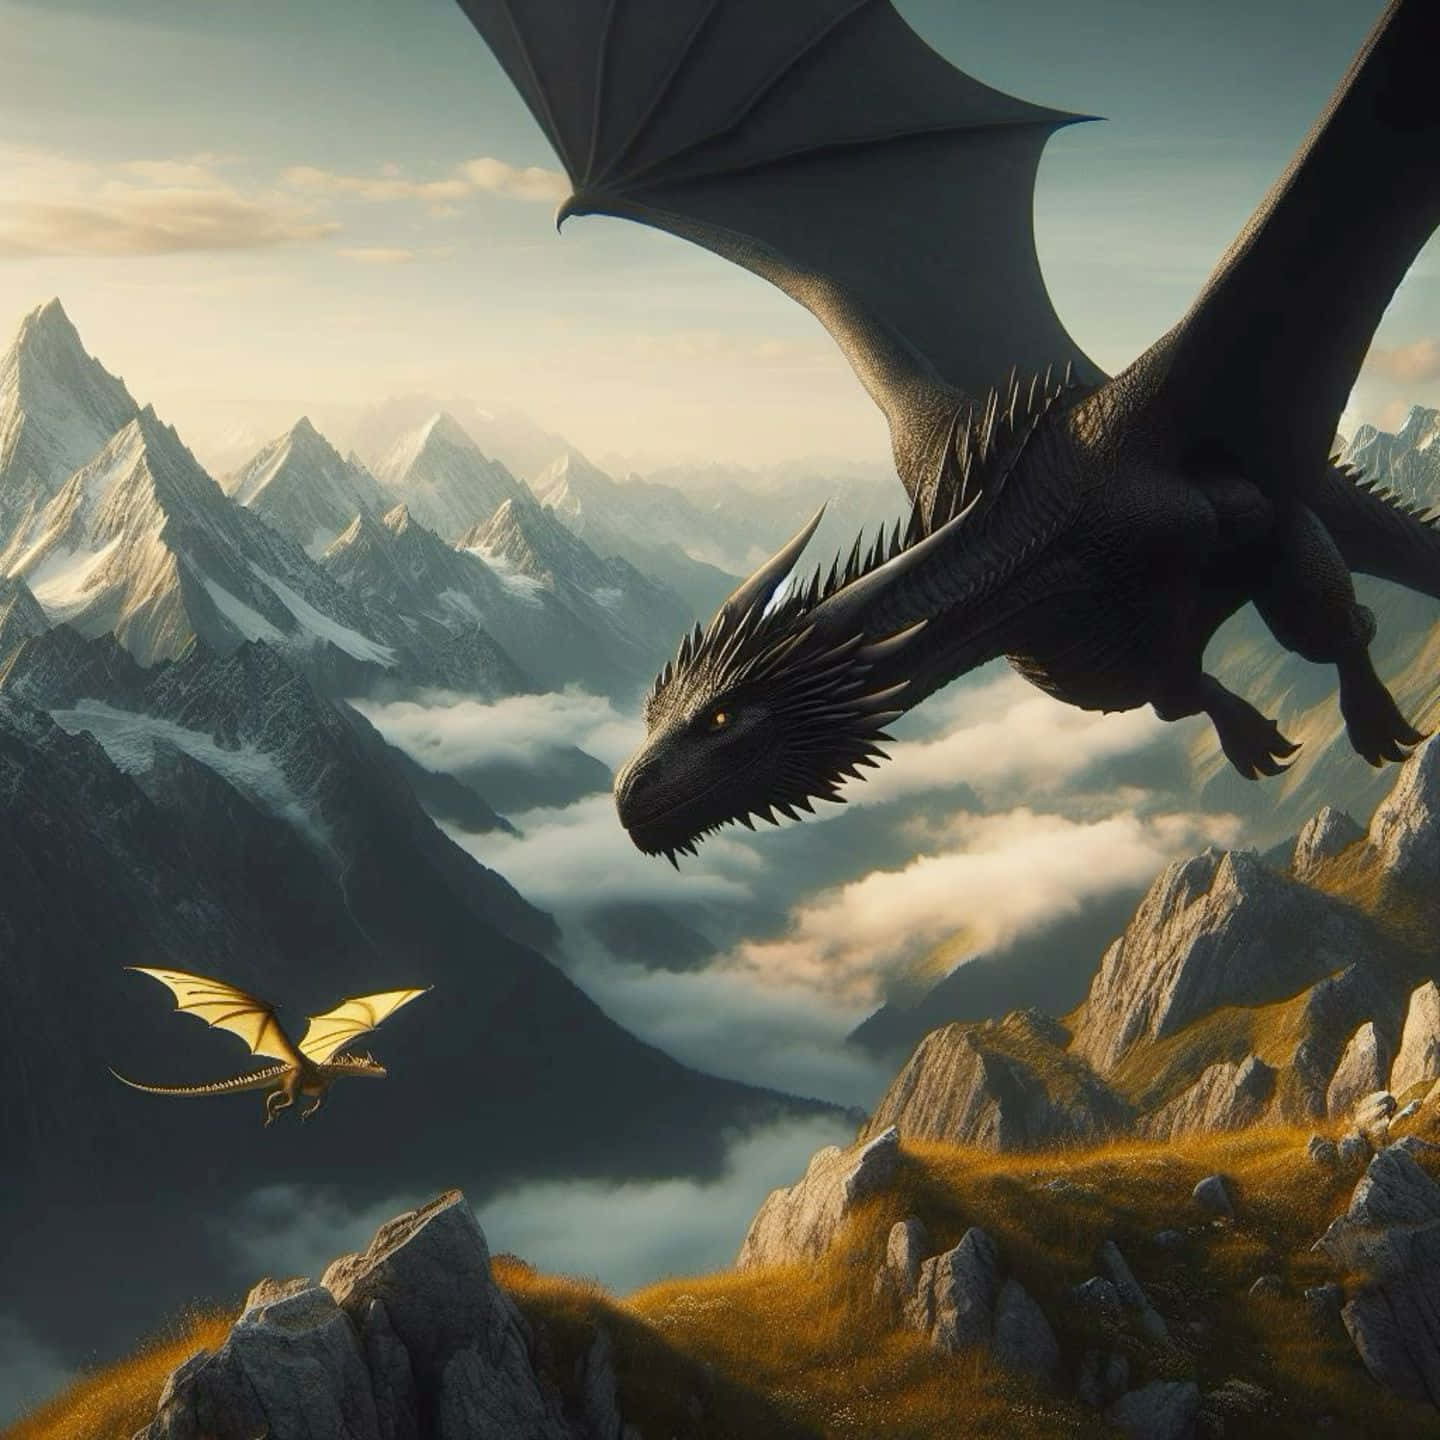 Majestic Dragons Over Mountain Ranges Wallpaper